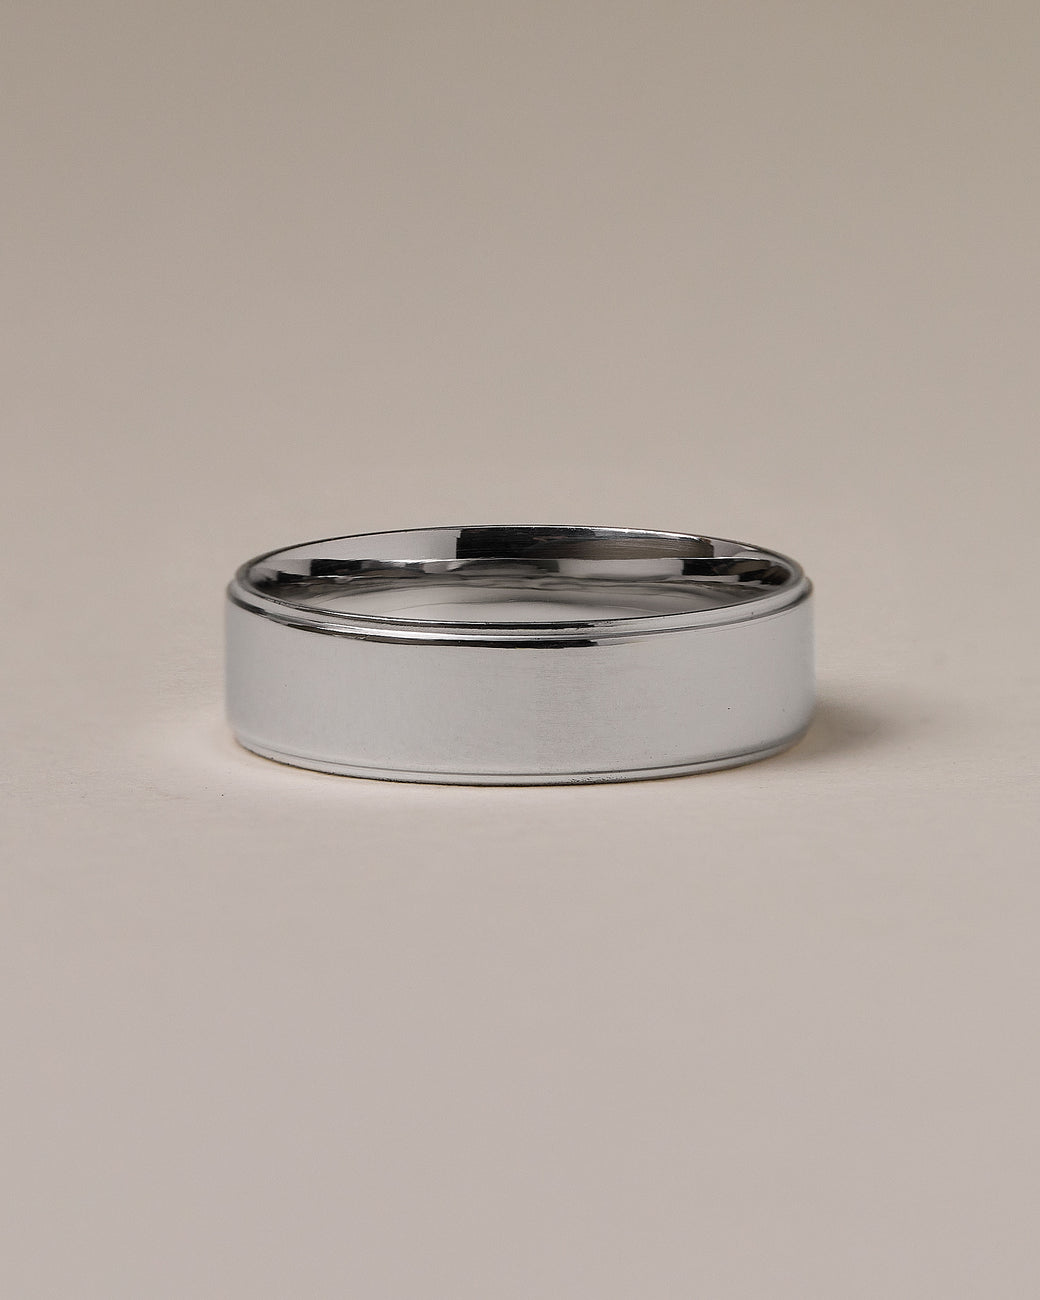 Photograph of your ring